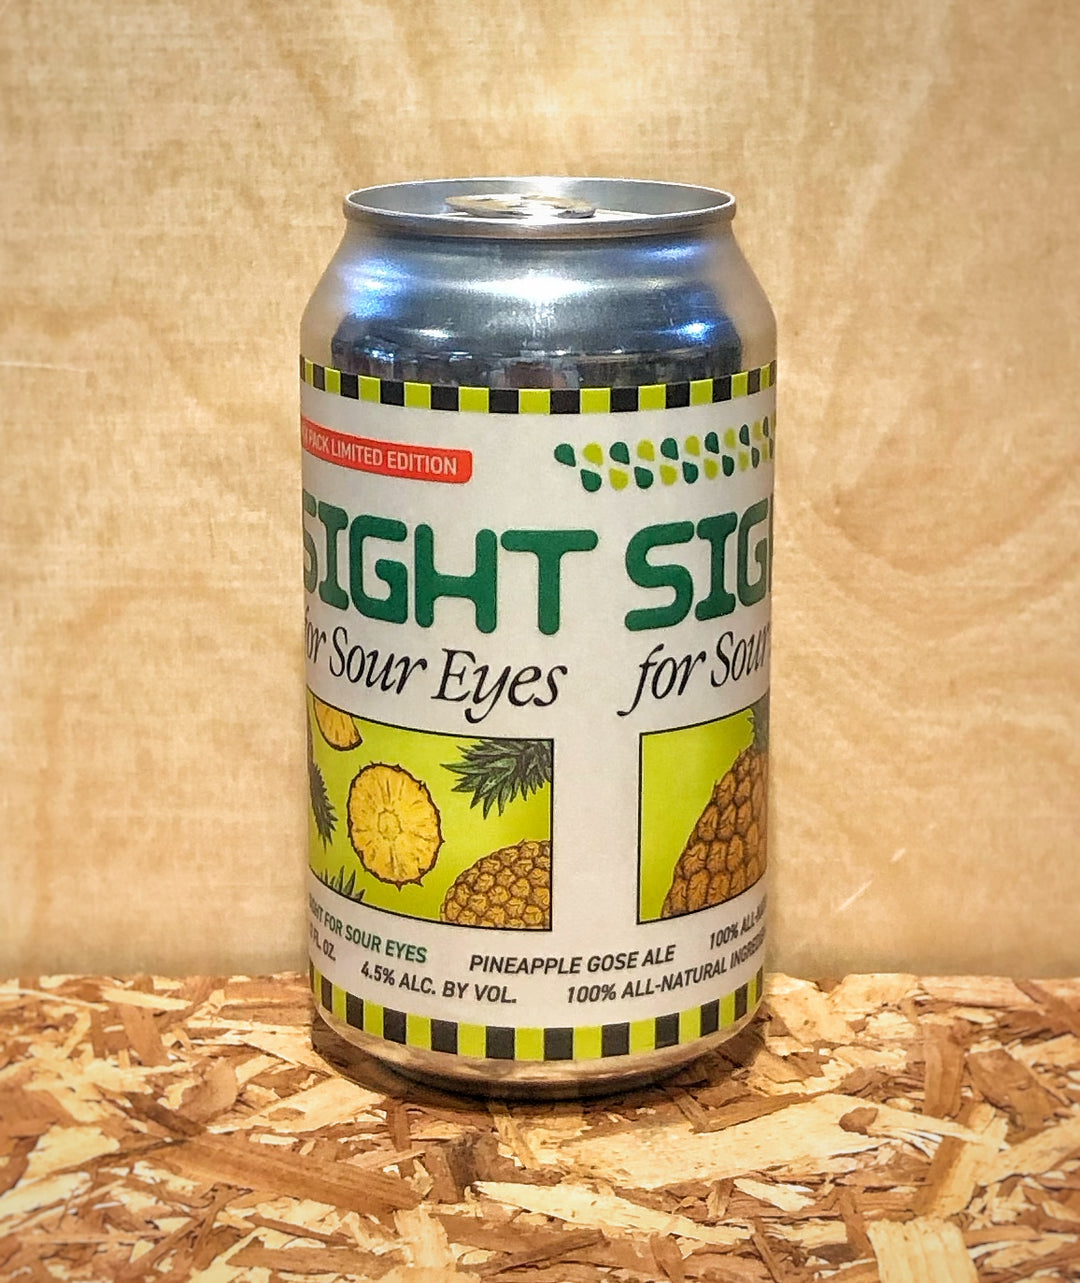 Upland Brewing 'Sight for Sour Eyes' Pineapple Gose Ale (Bloomington, IL)